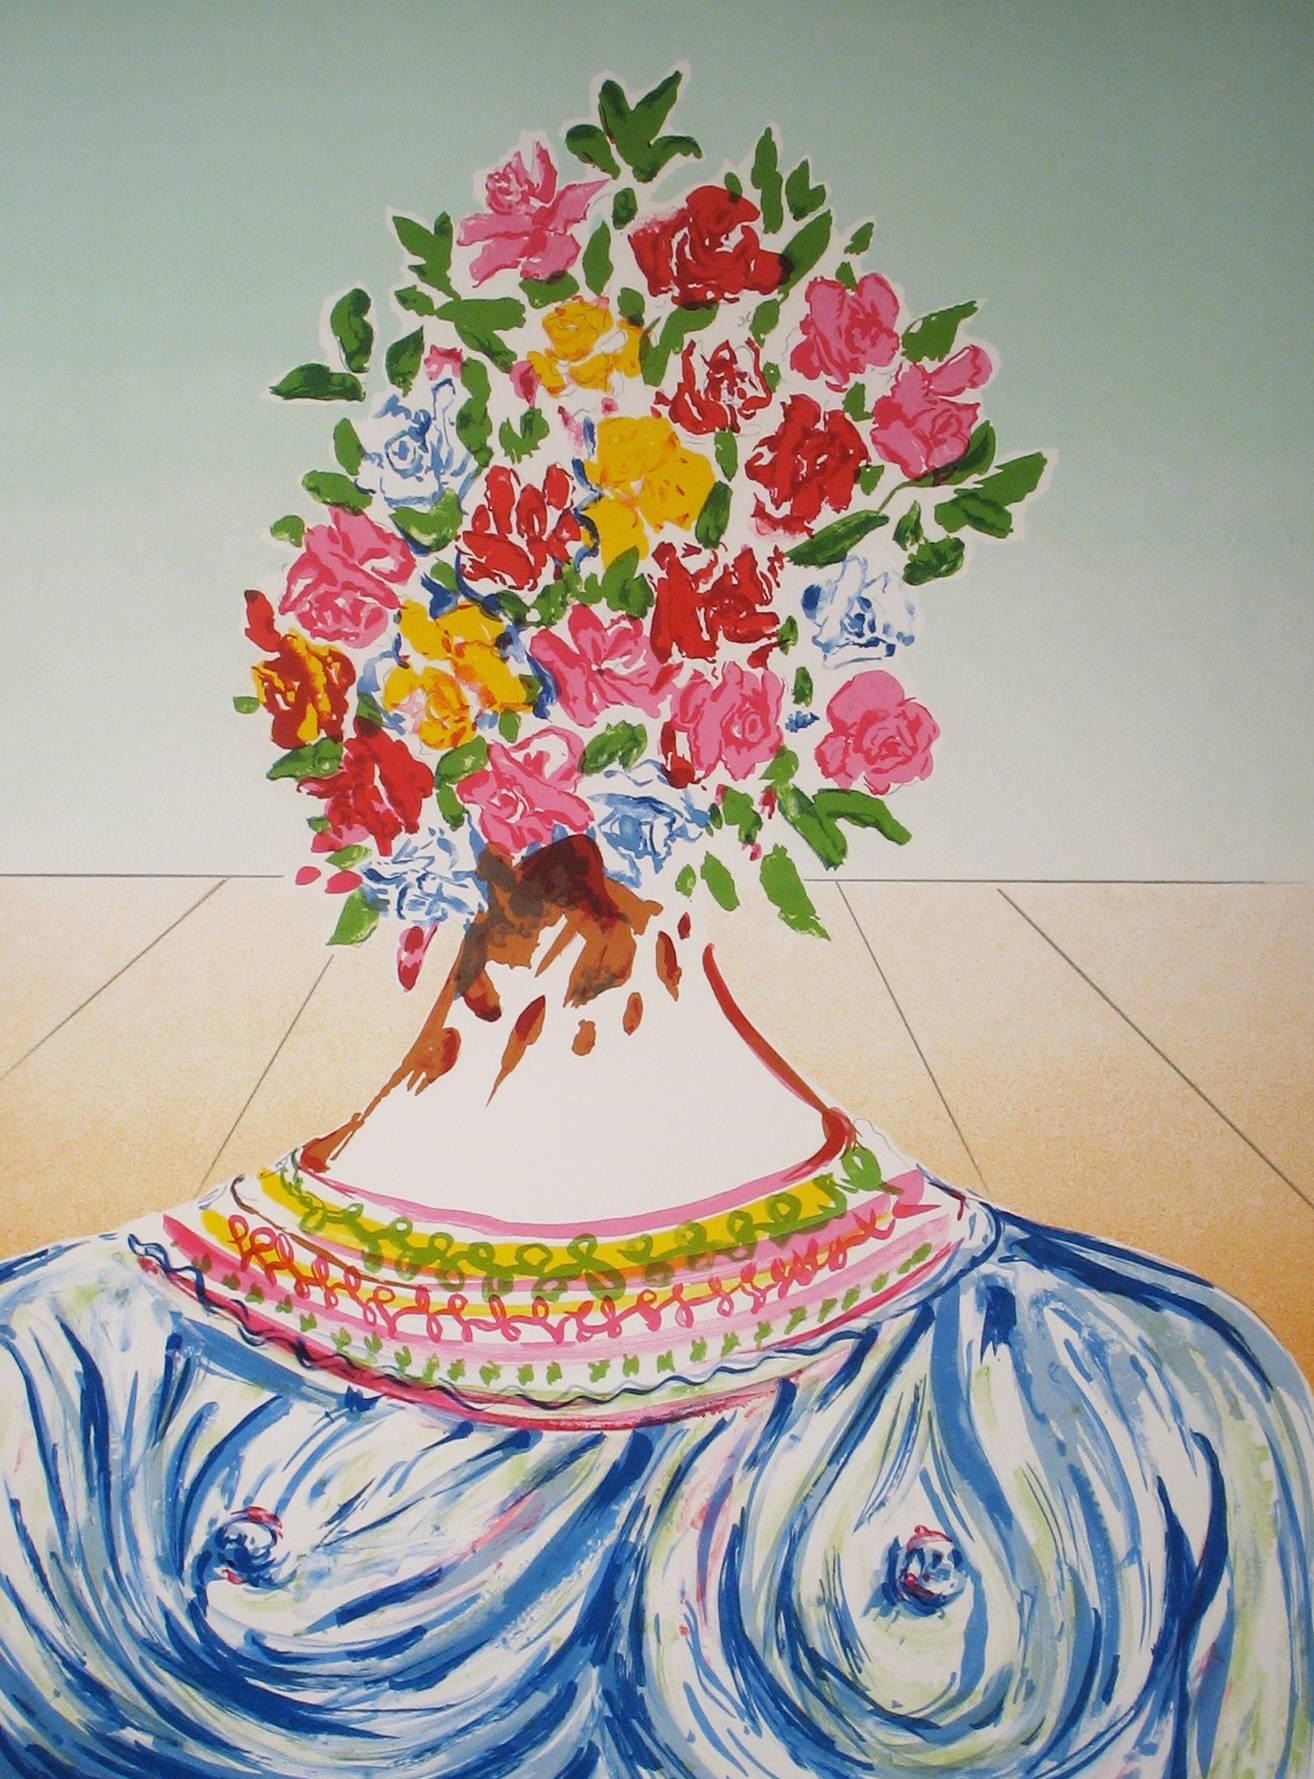 The Flowering of Inspiration (Gala in Flowers) - Print by Salvador Dalí